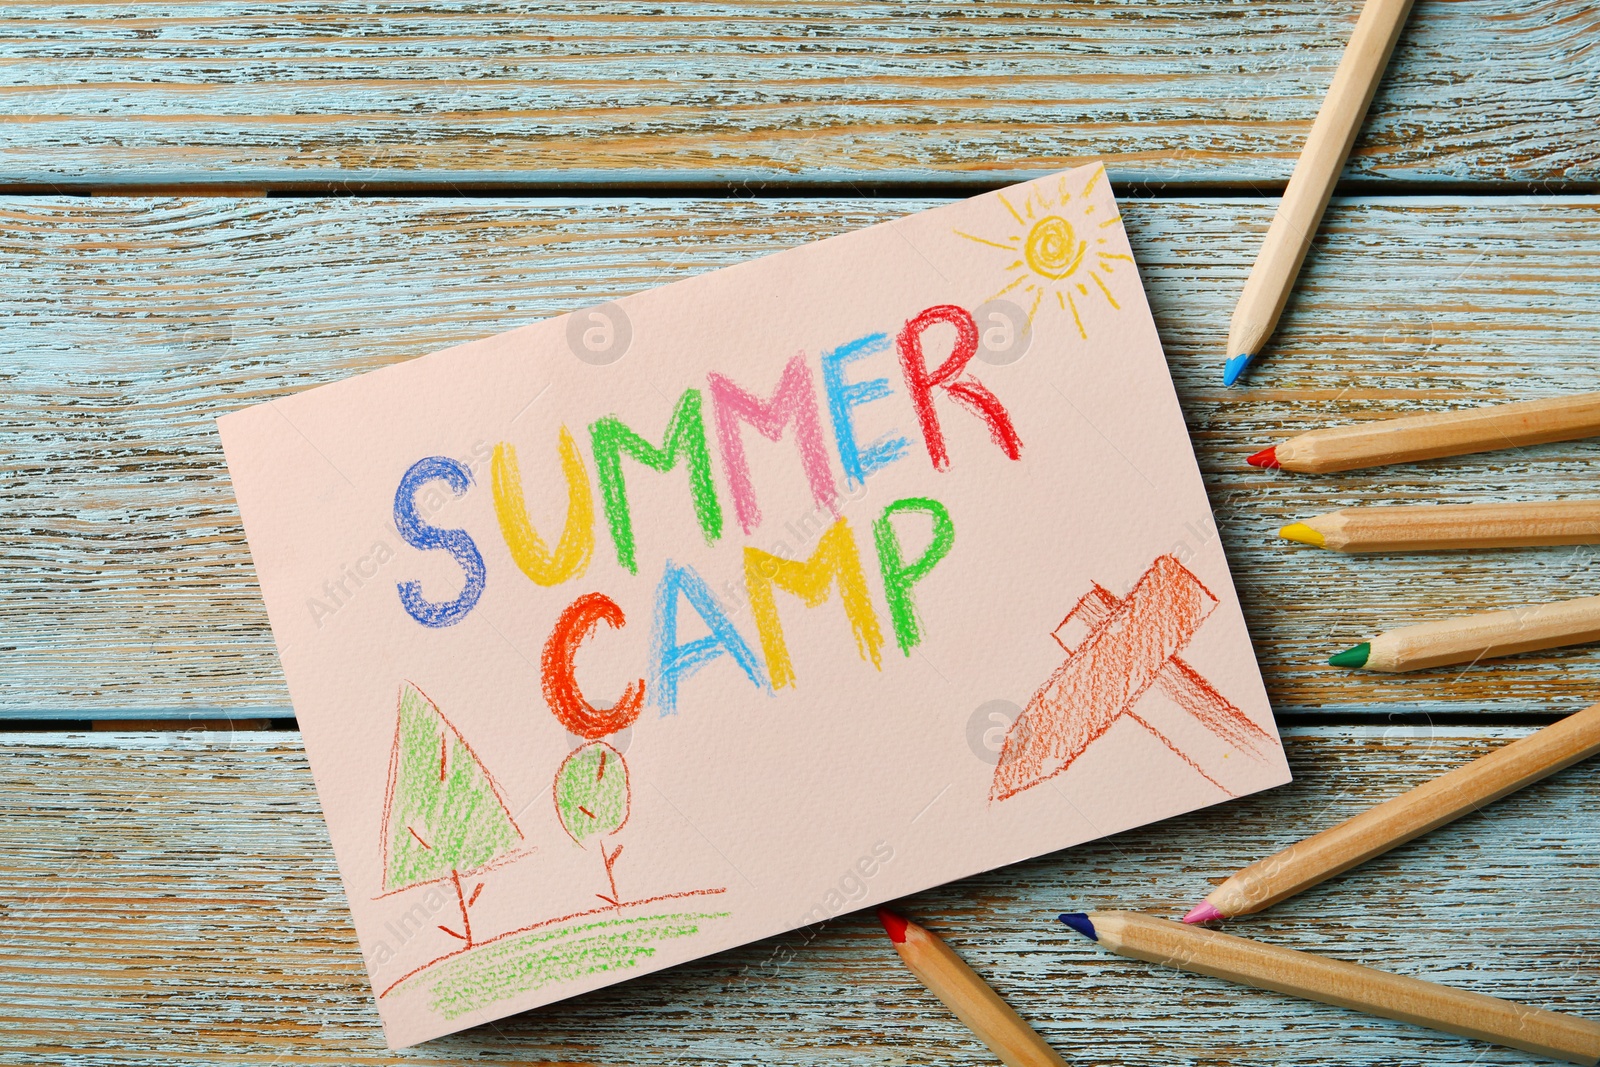 Photo of Paper with written text SUMMER CAMP, drawings and different pencils on wooden background, top view